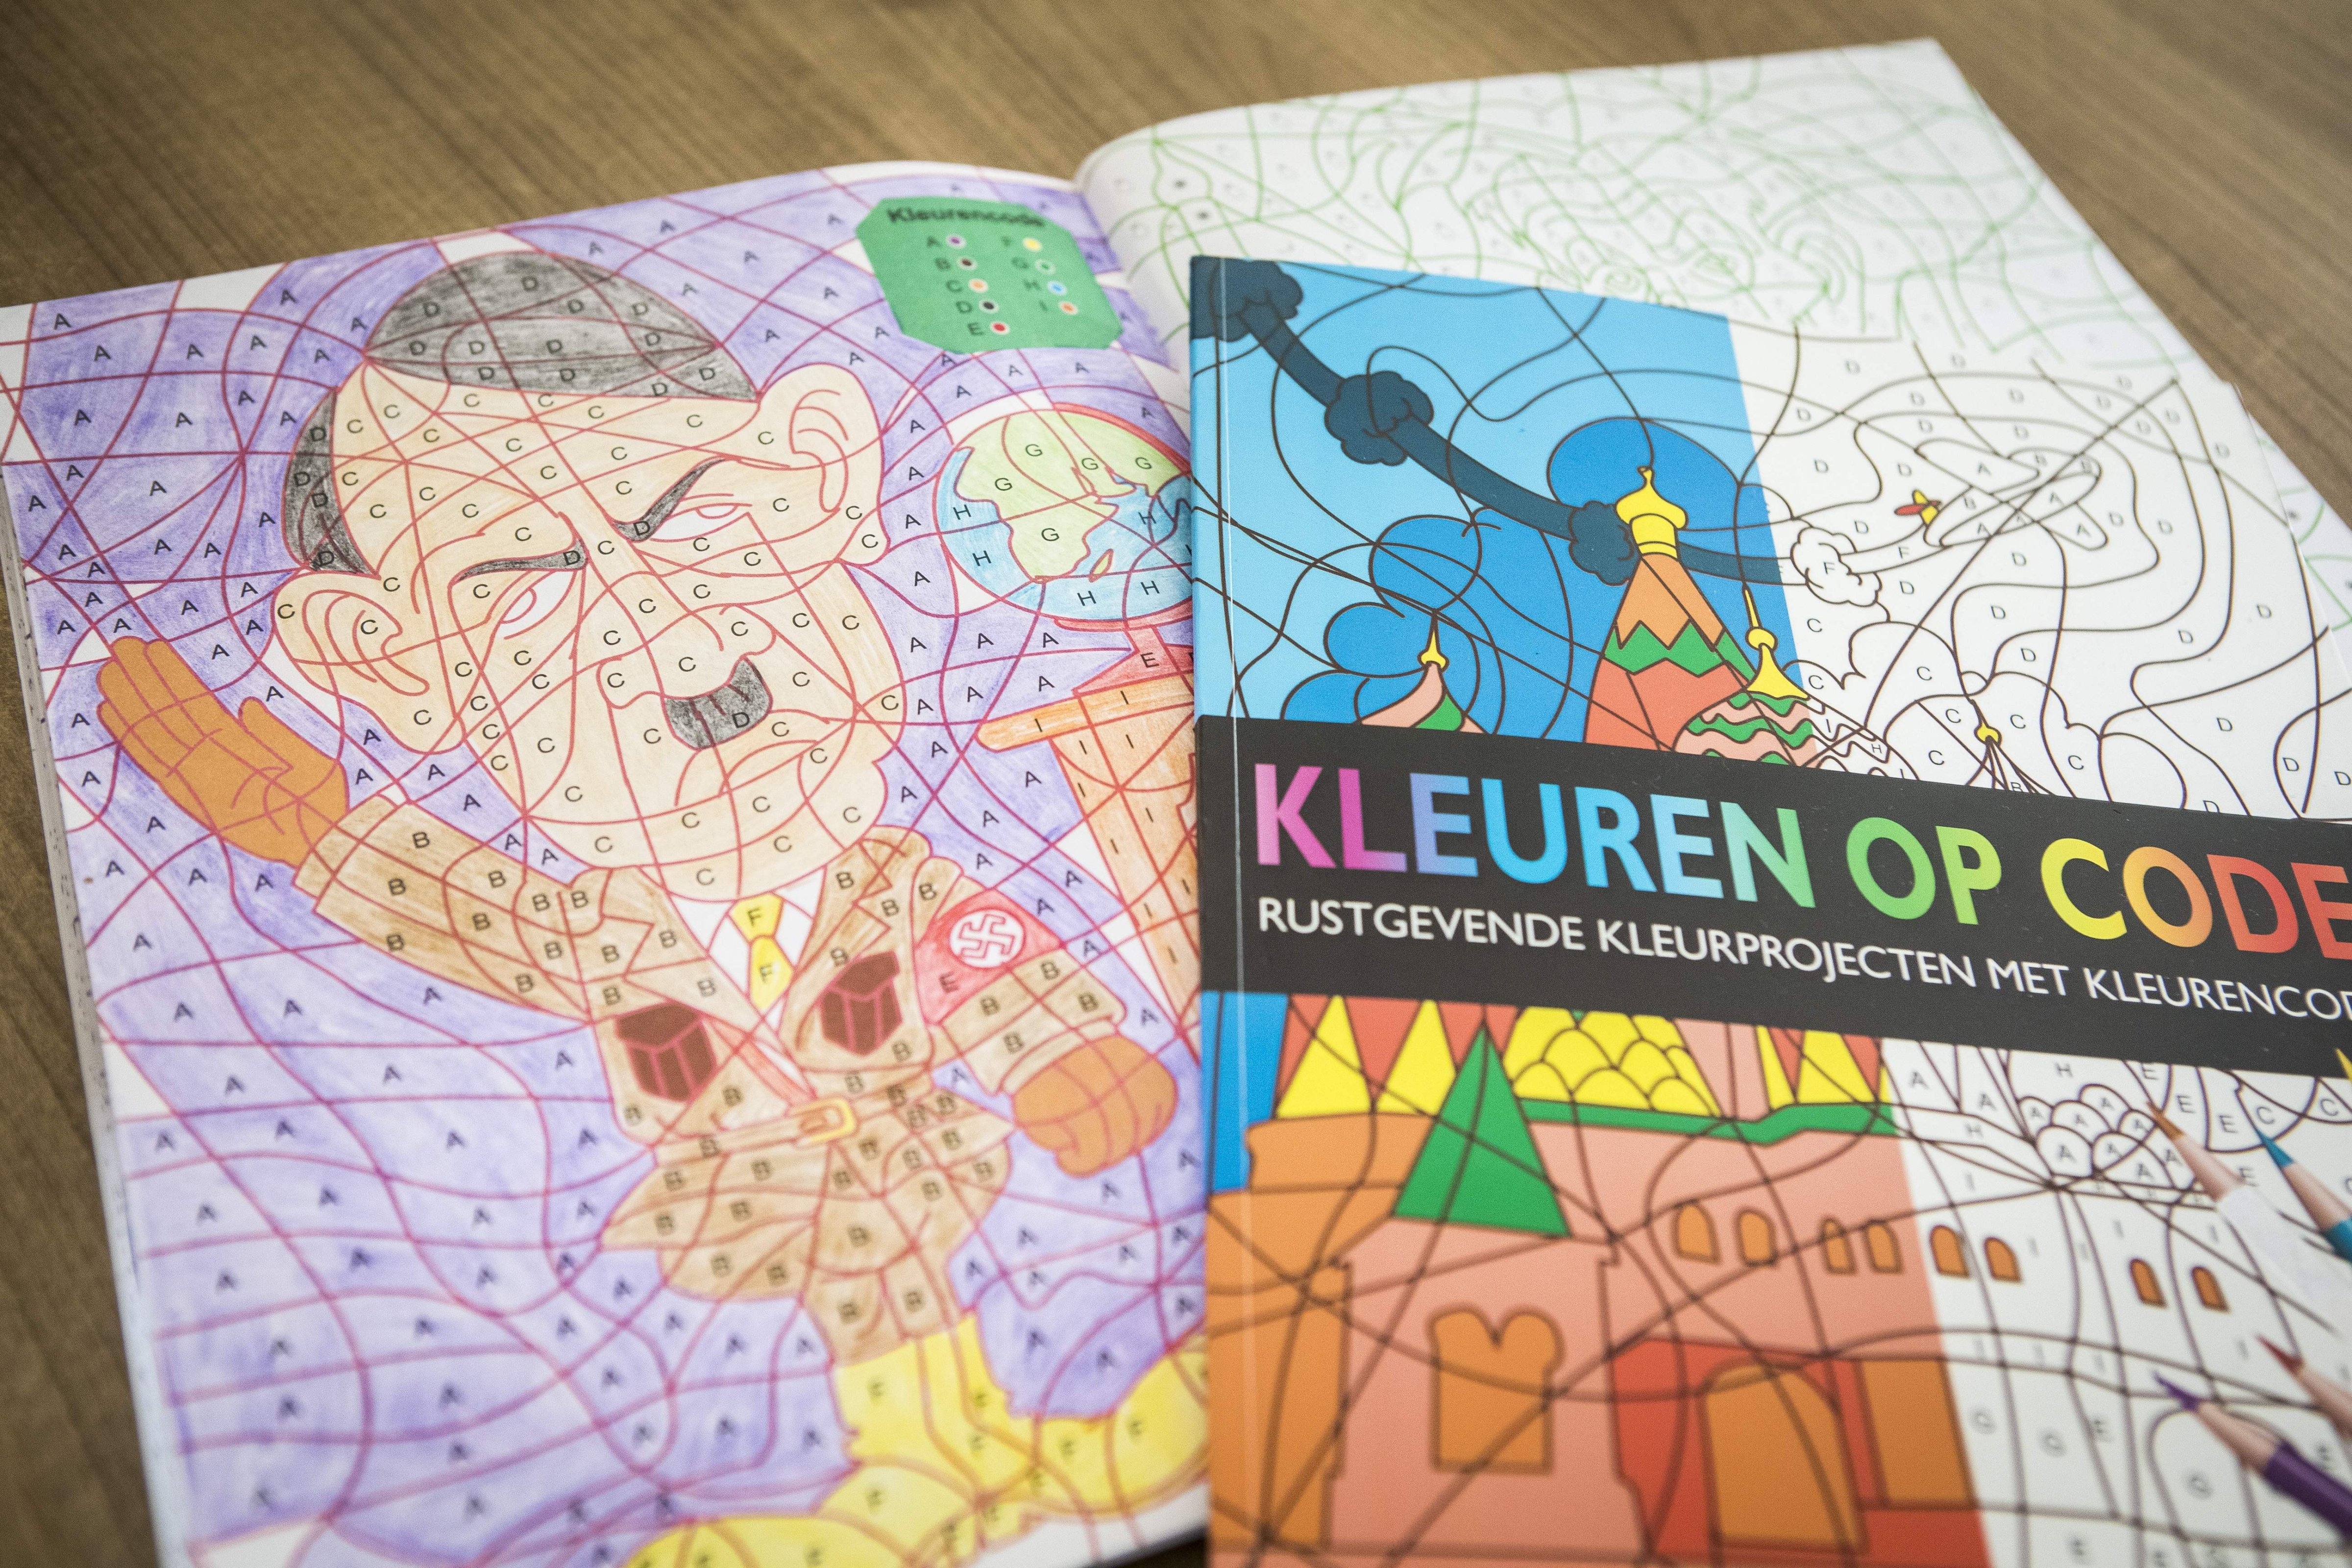 A coloring book with an image of Adolf Hitler bought at the Dutch store Kruidvat in Pijnacker, the Netherlands, on April 5, 2017. (ALEXANDER SCHIPPERS—AFP/Getty Images)